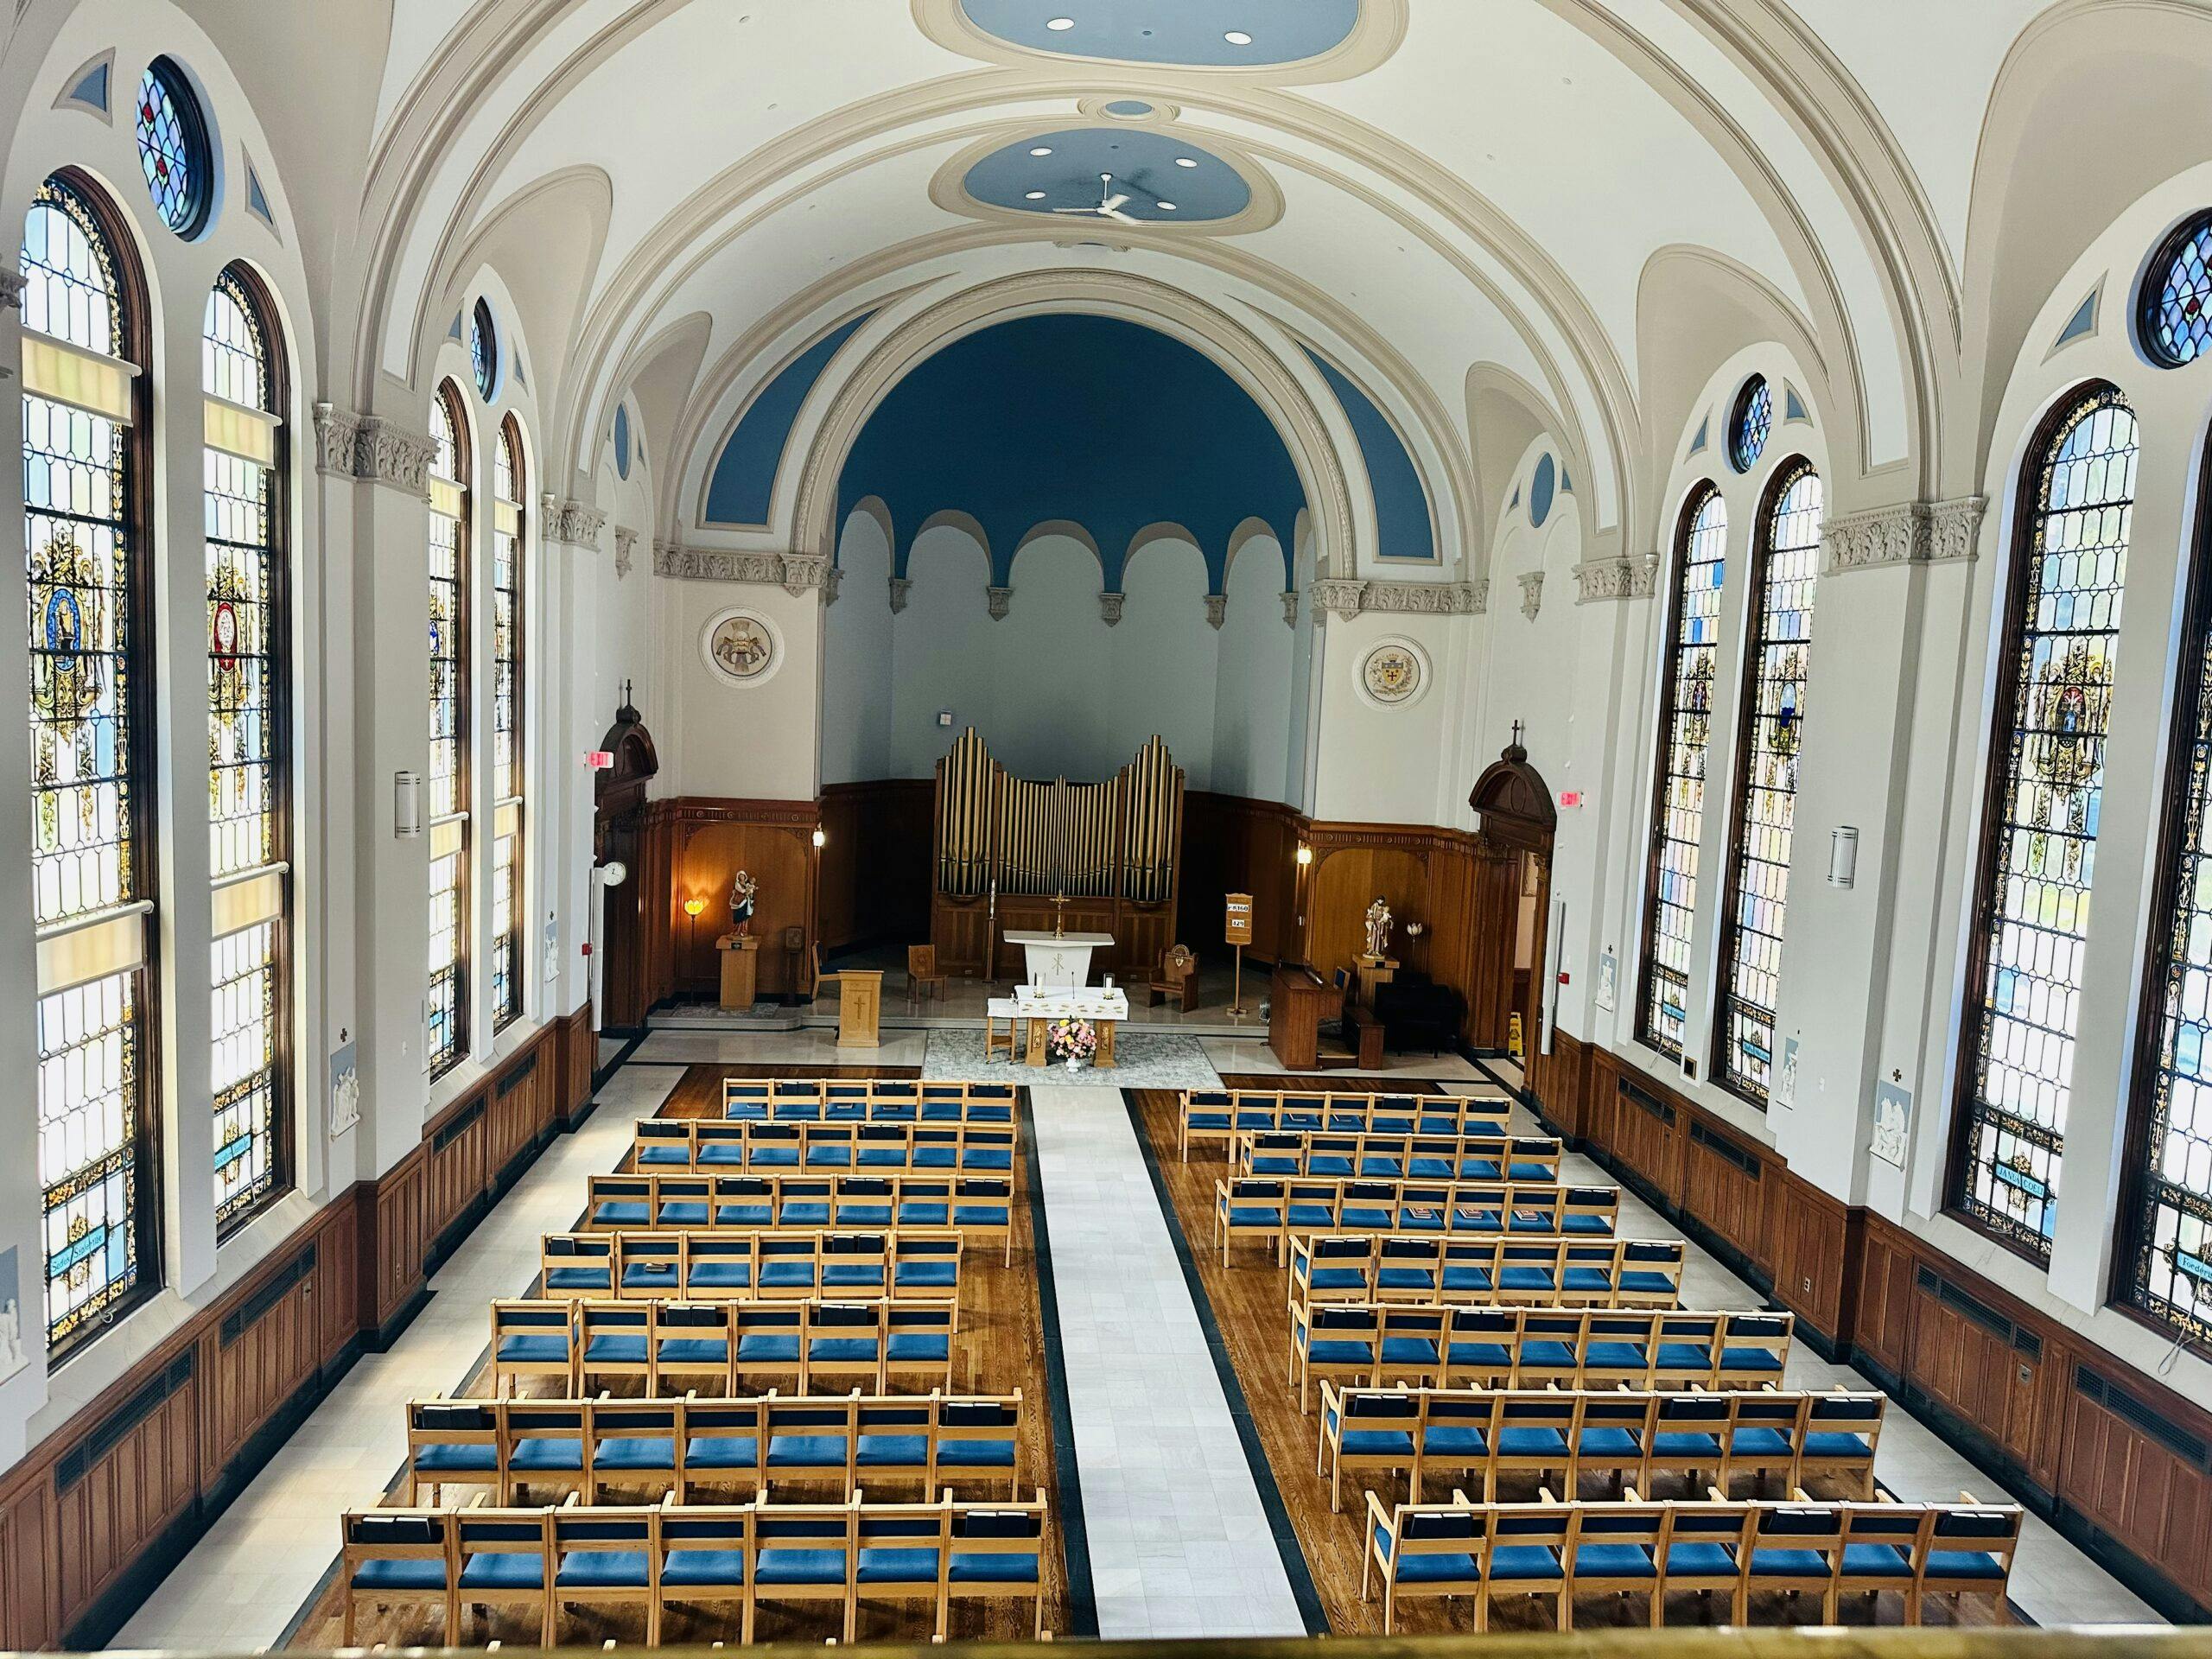 Du Lac Chapel, a church with rows of blue chairs.